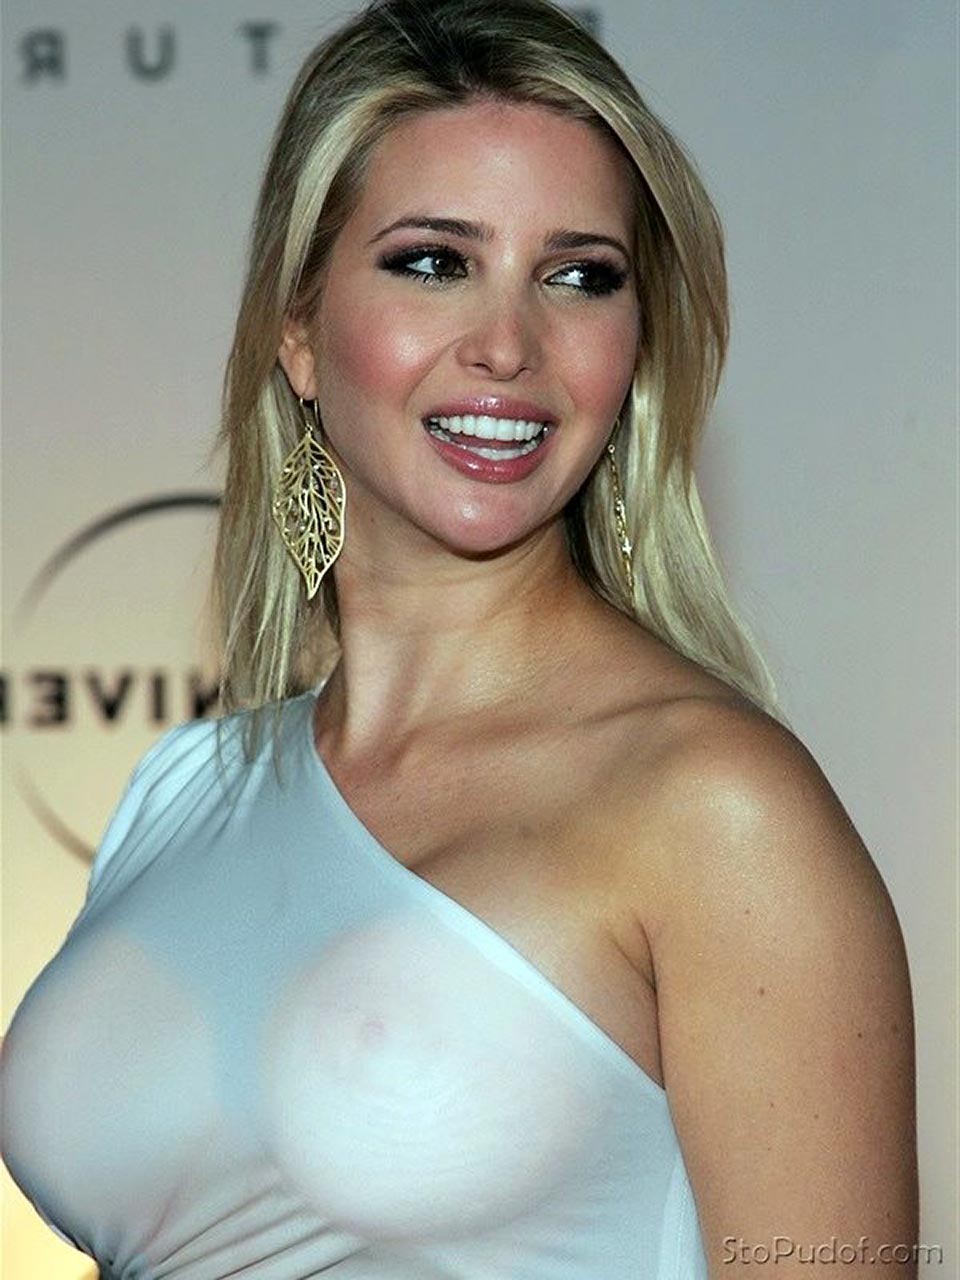 Donald trumps daughter naked